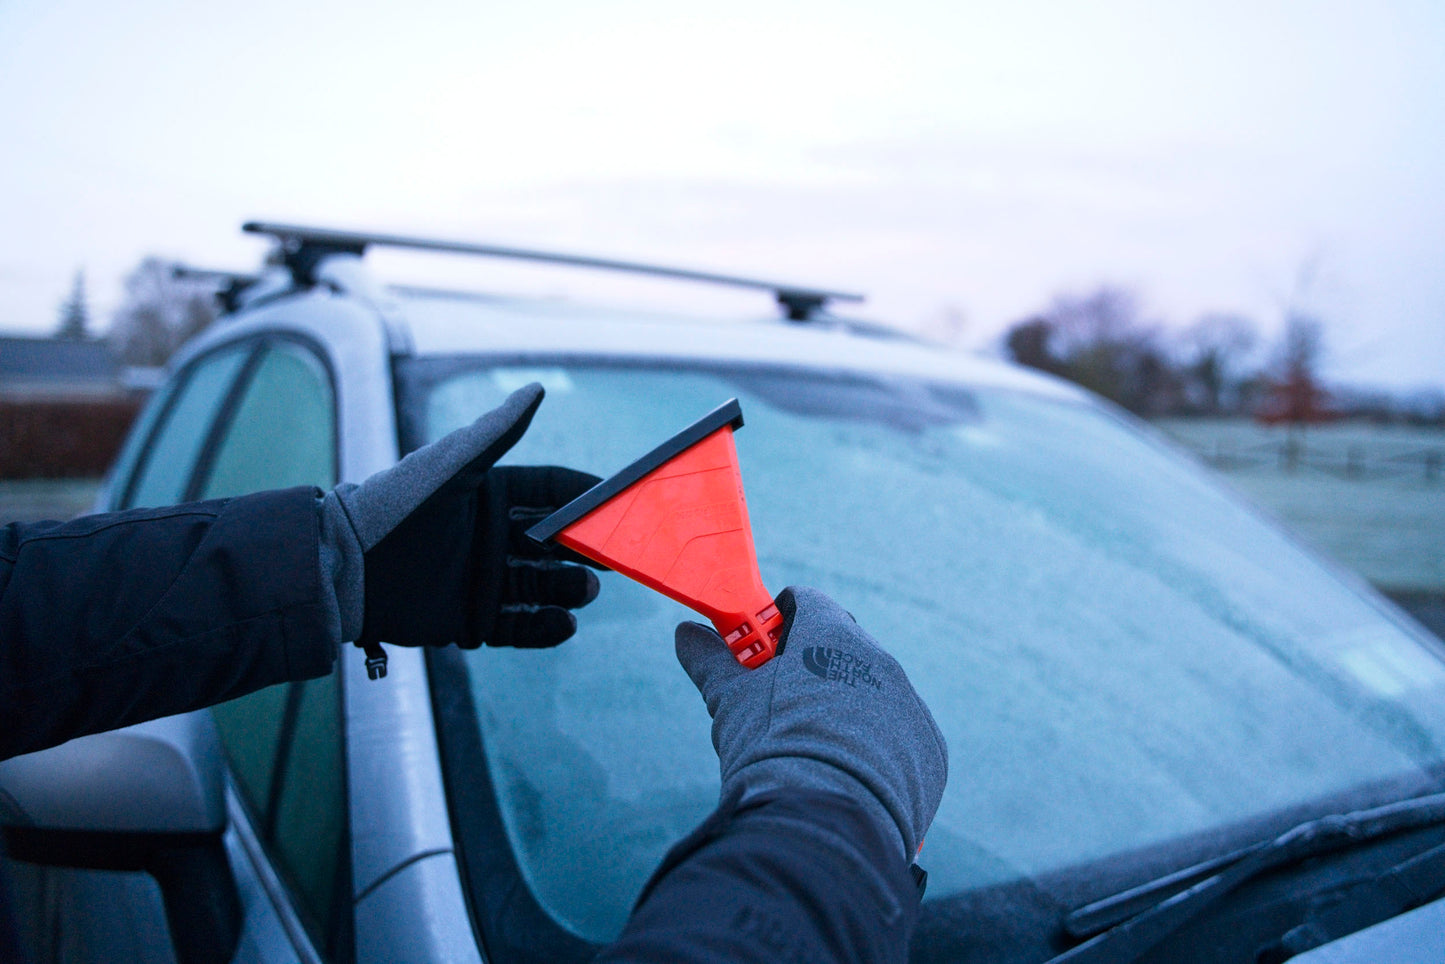 Stayhold ICE SCRAPER+SQUEEGEE squeegee on